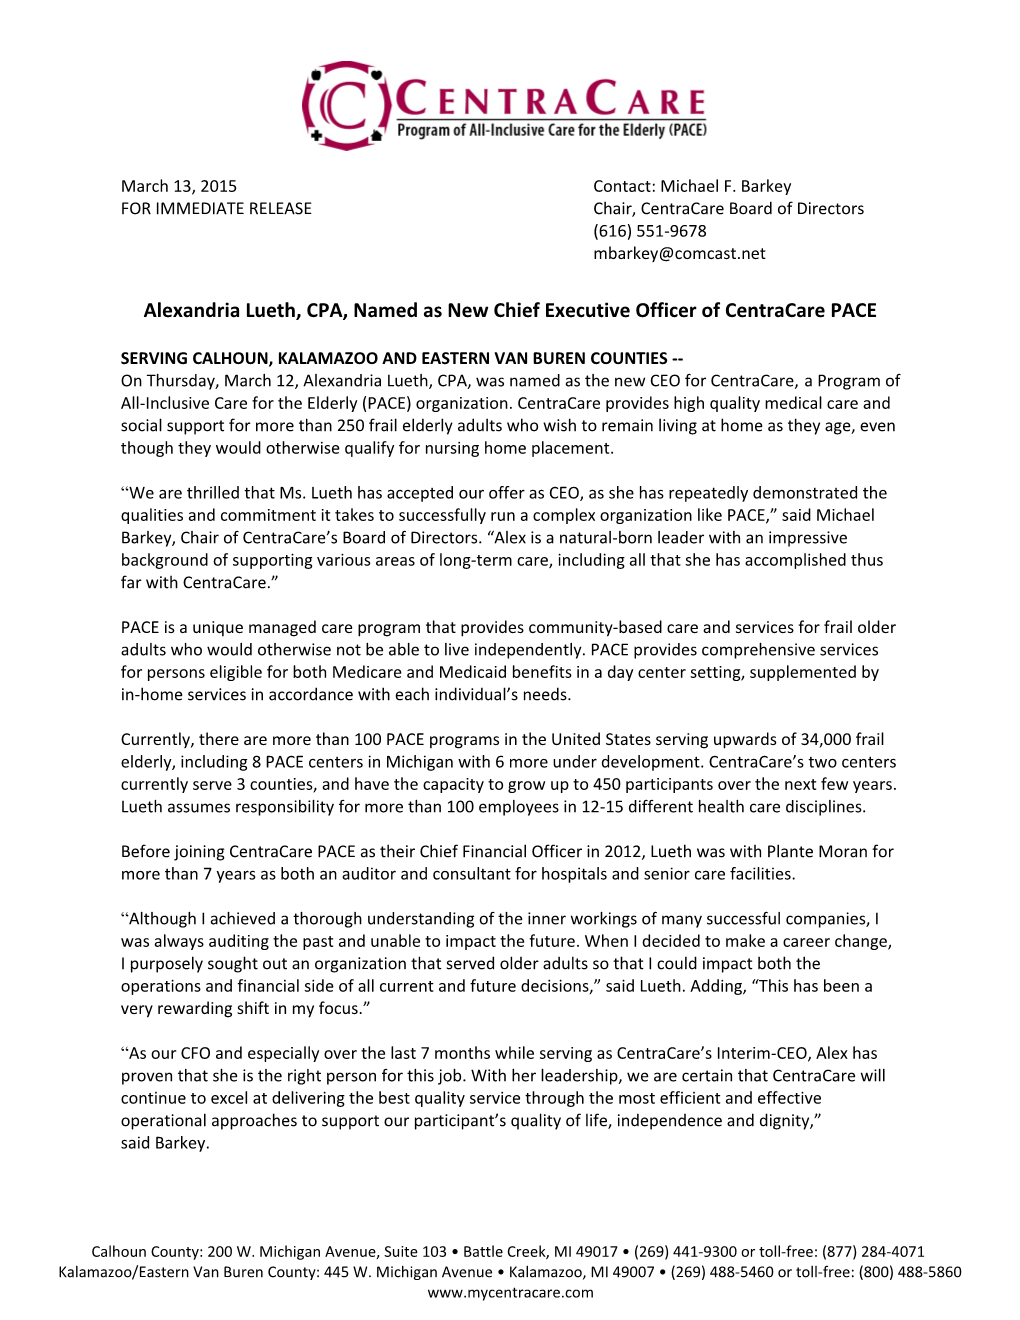 FOR IMMEDIATE RELEASE Chair, Centracare Board of Directors